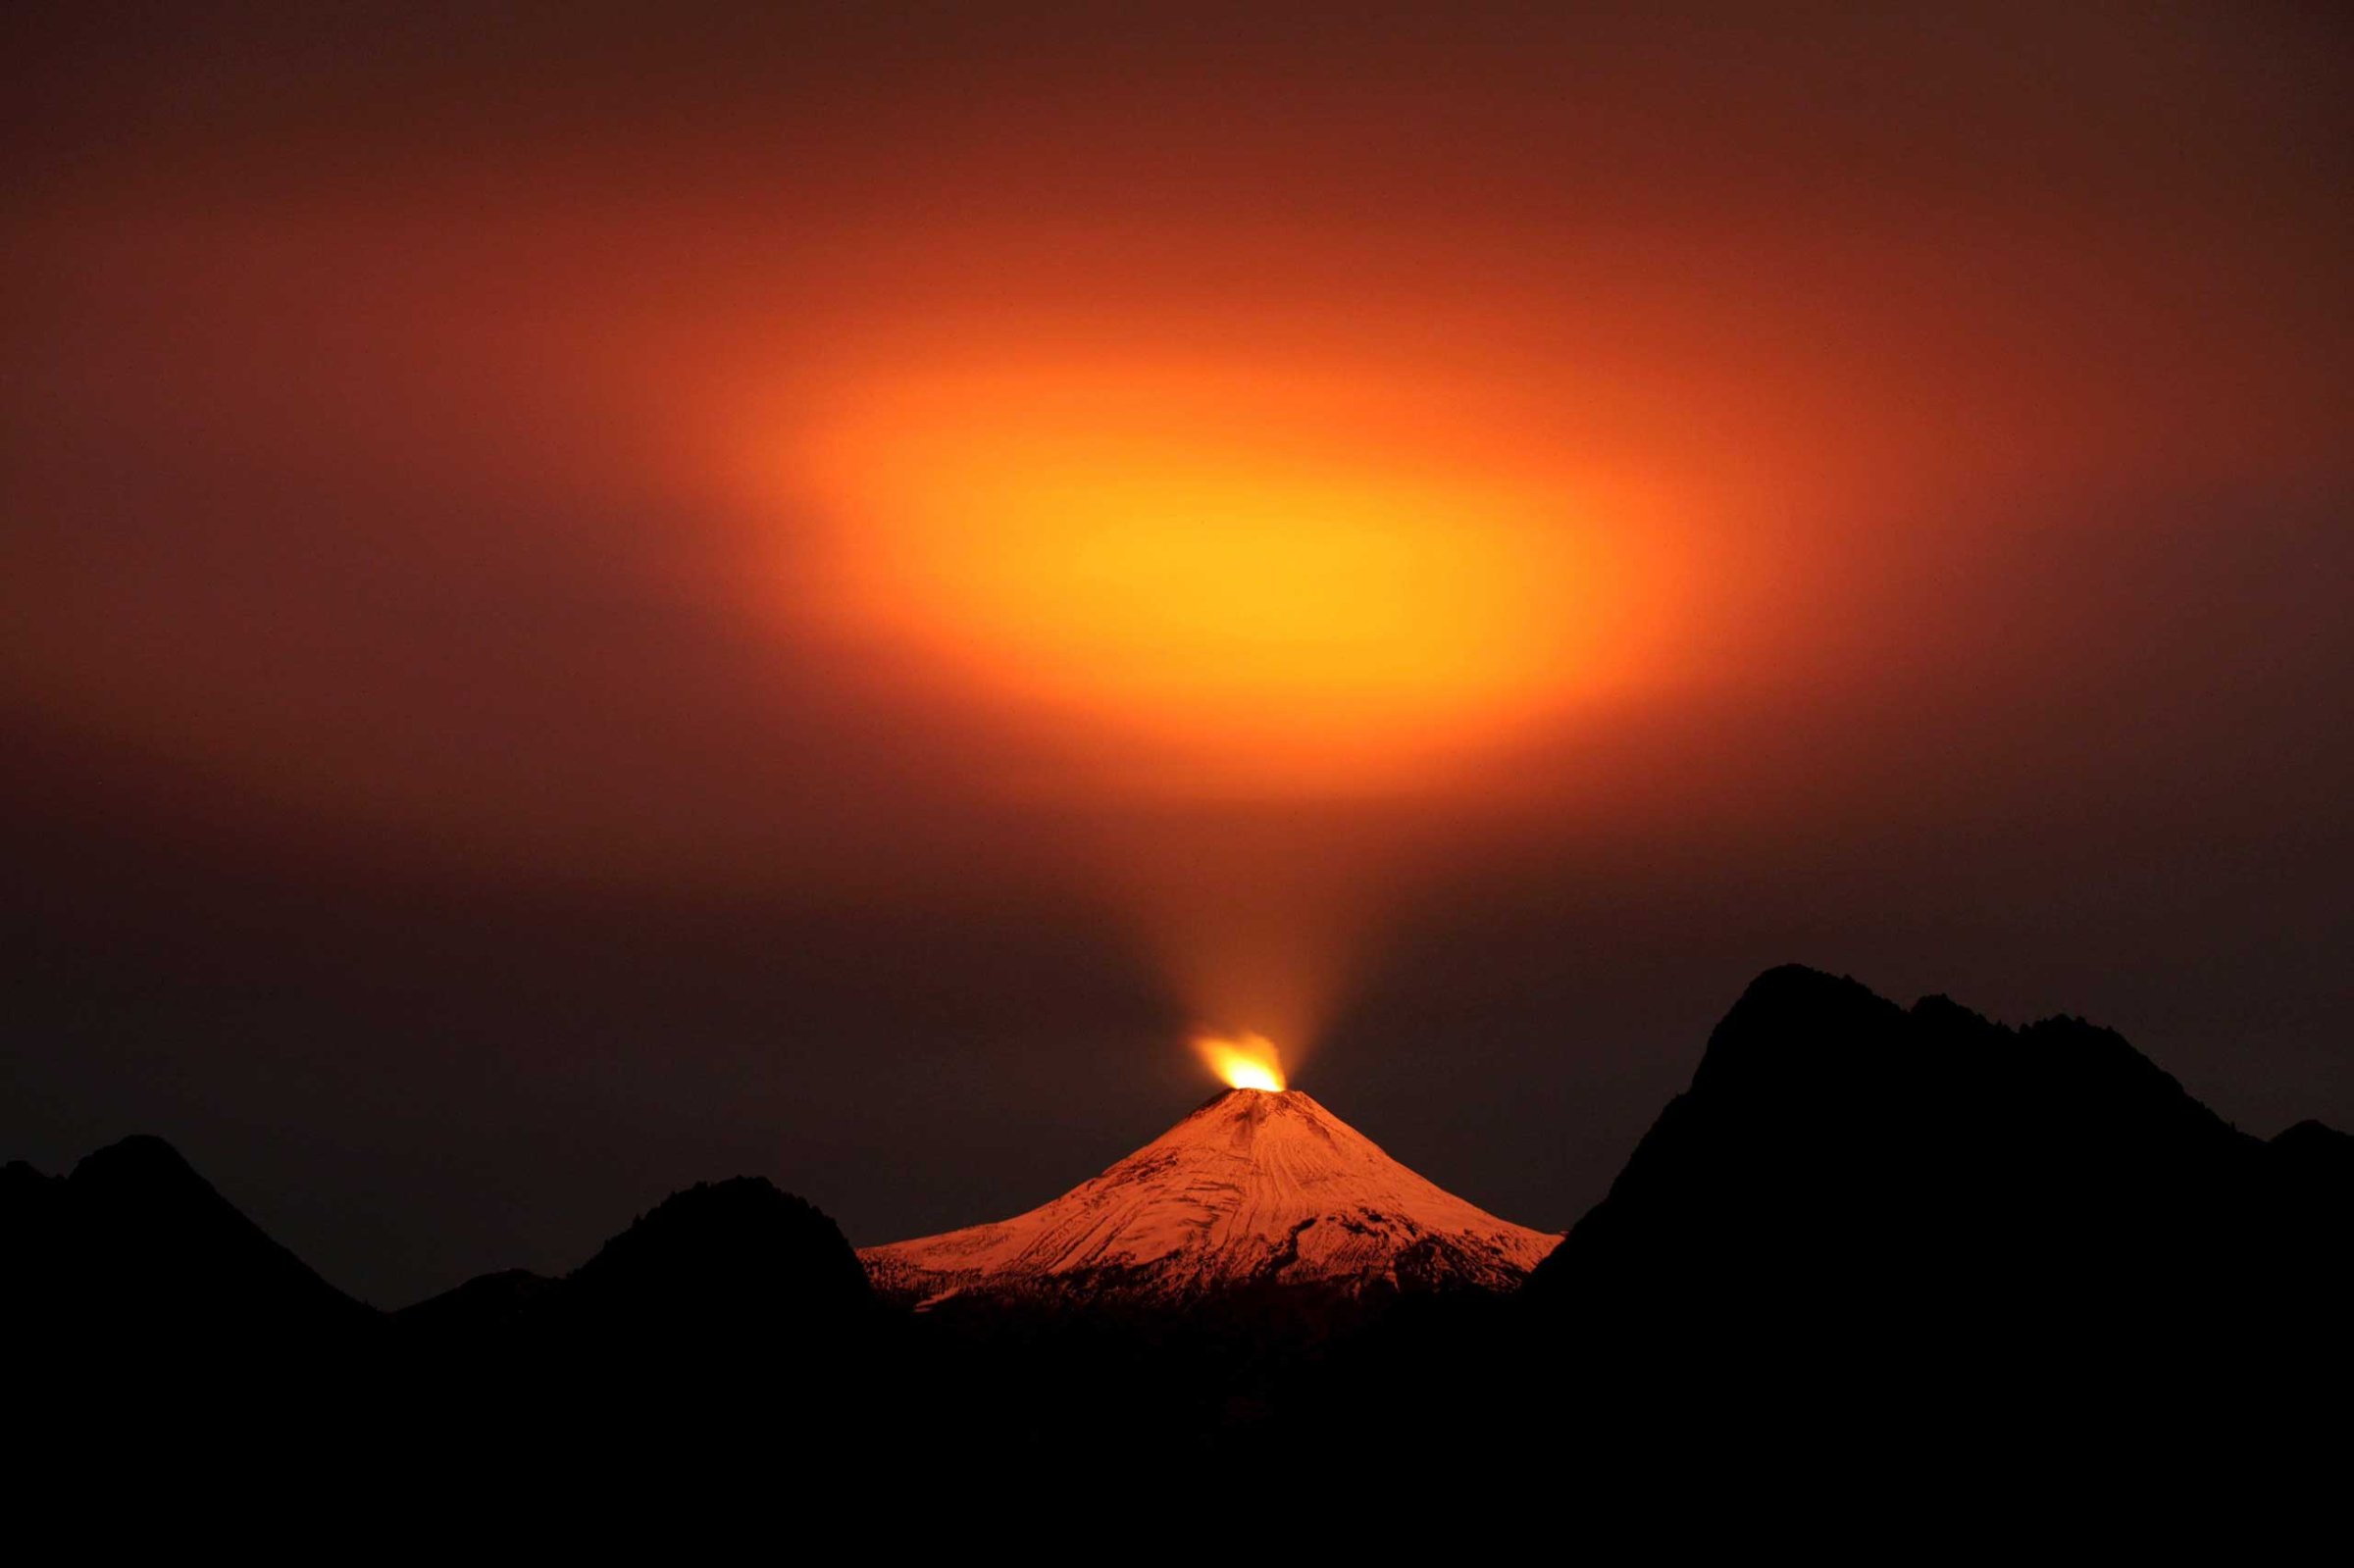 The Villarrica Volcano at night in Pucon town, Chile on May 10, 2015.